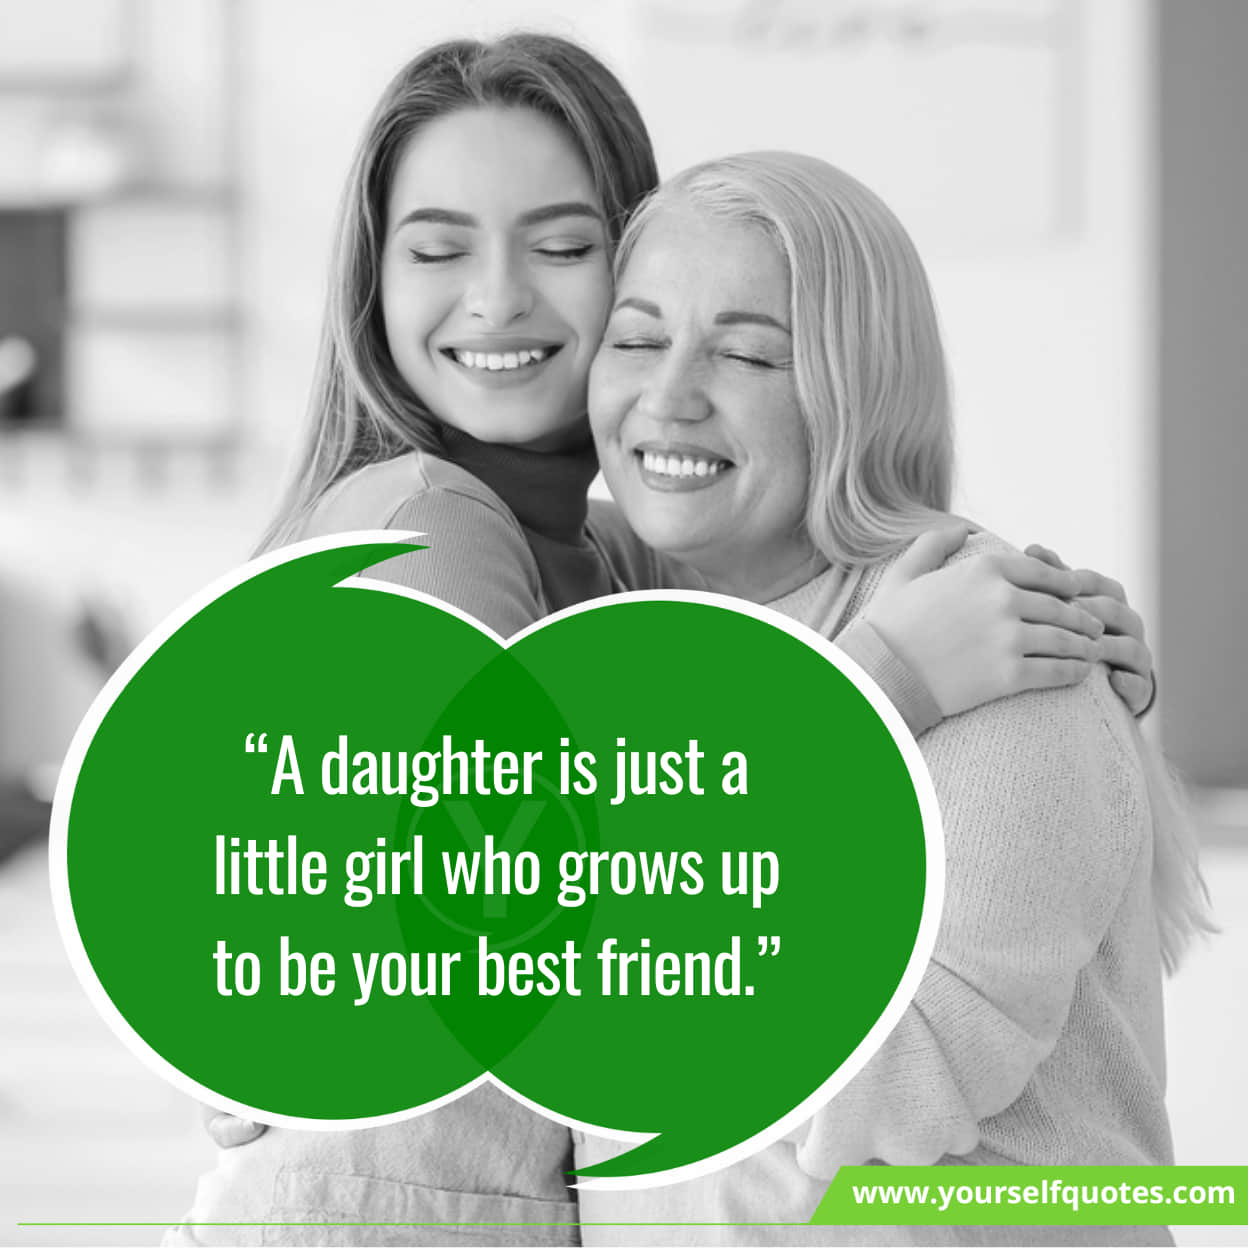 Inspiring Mother-Daughter Motivational Quotes 